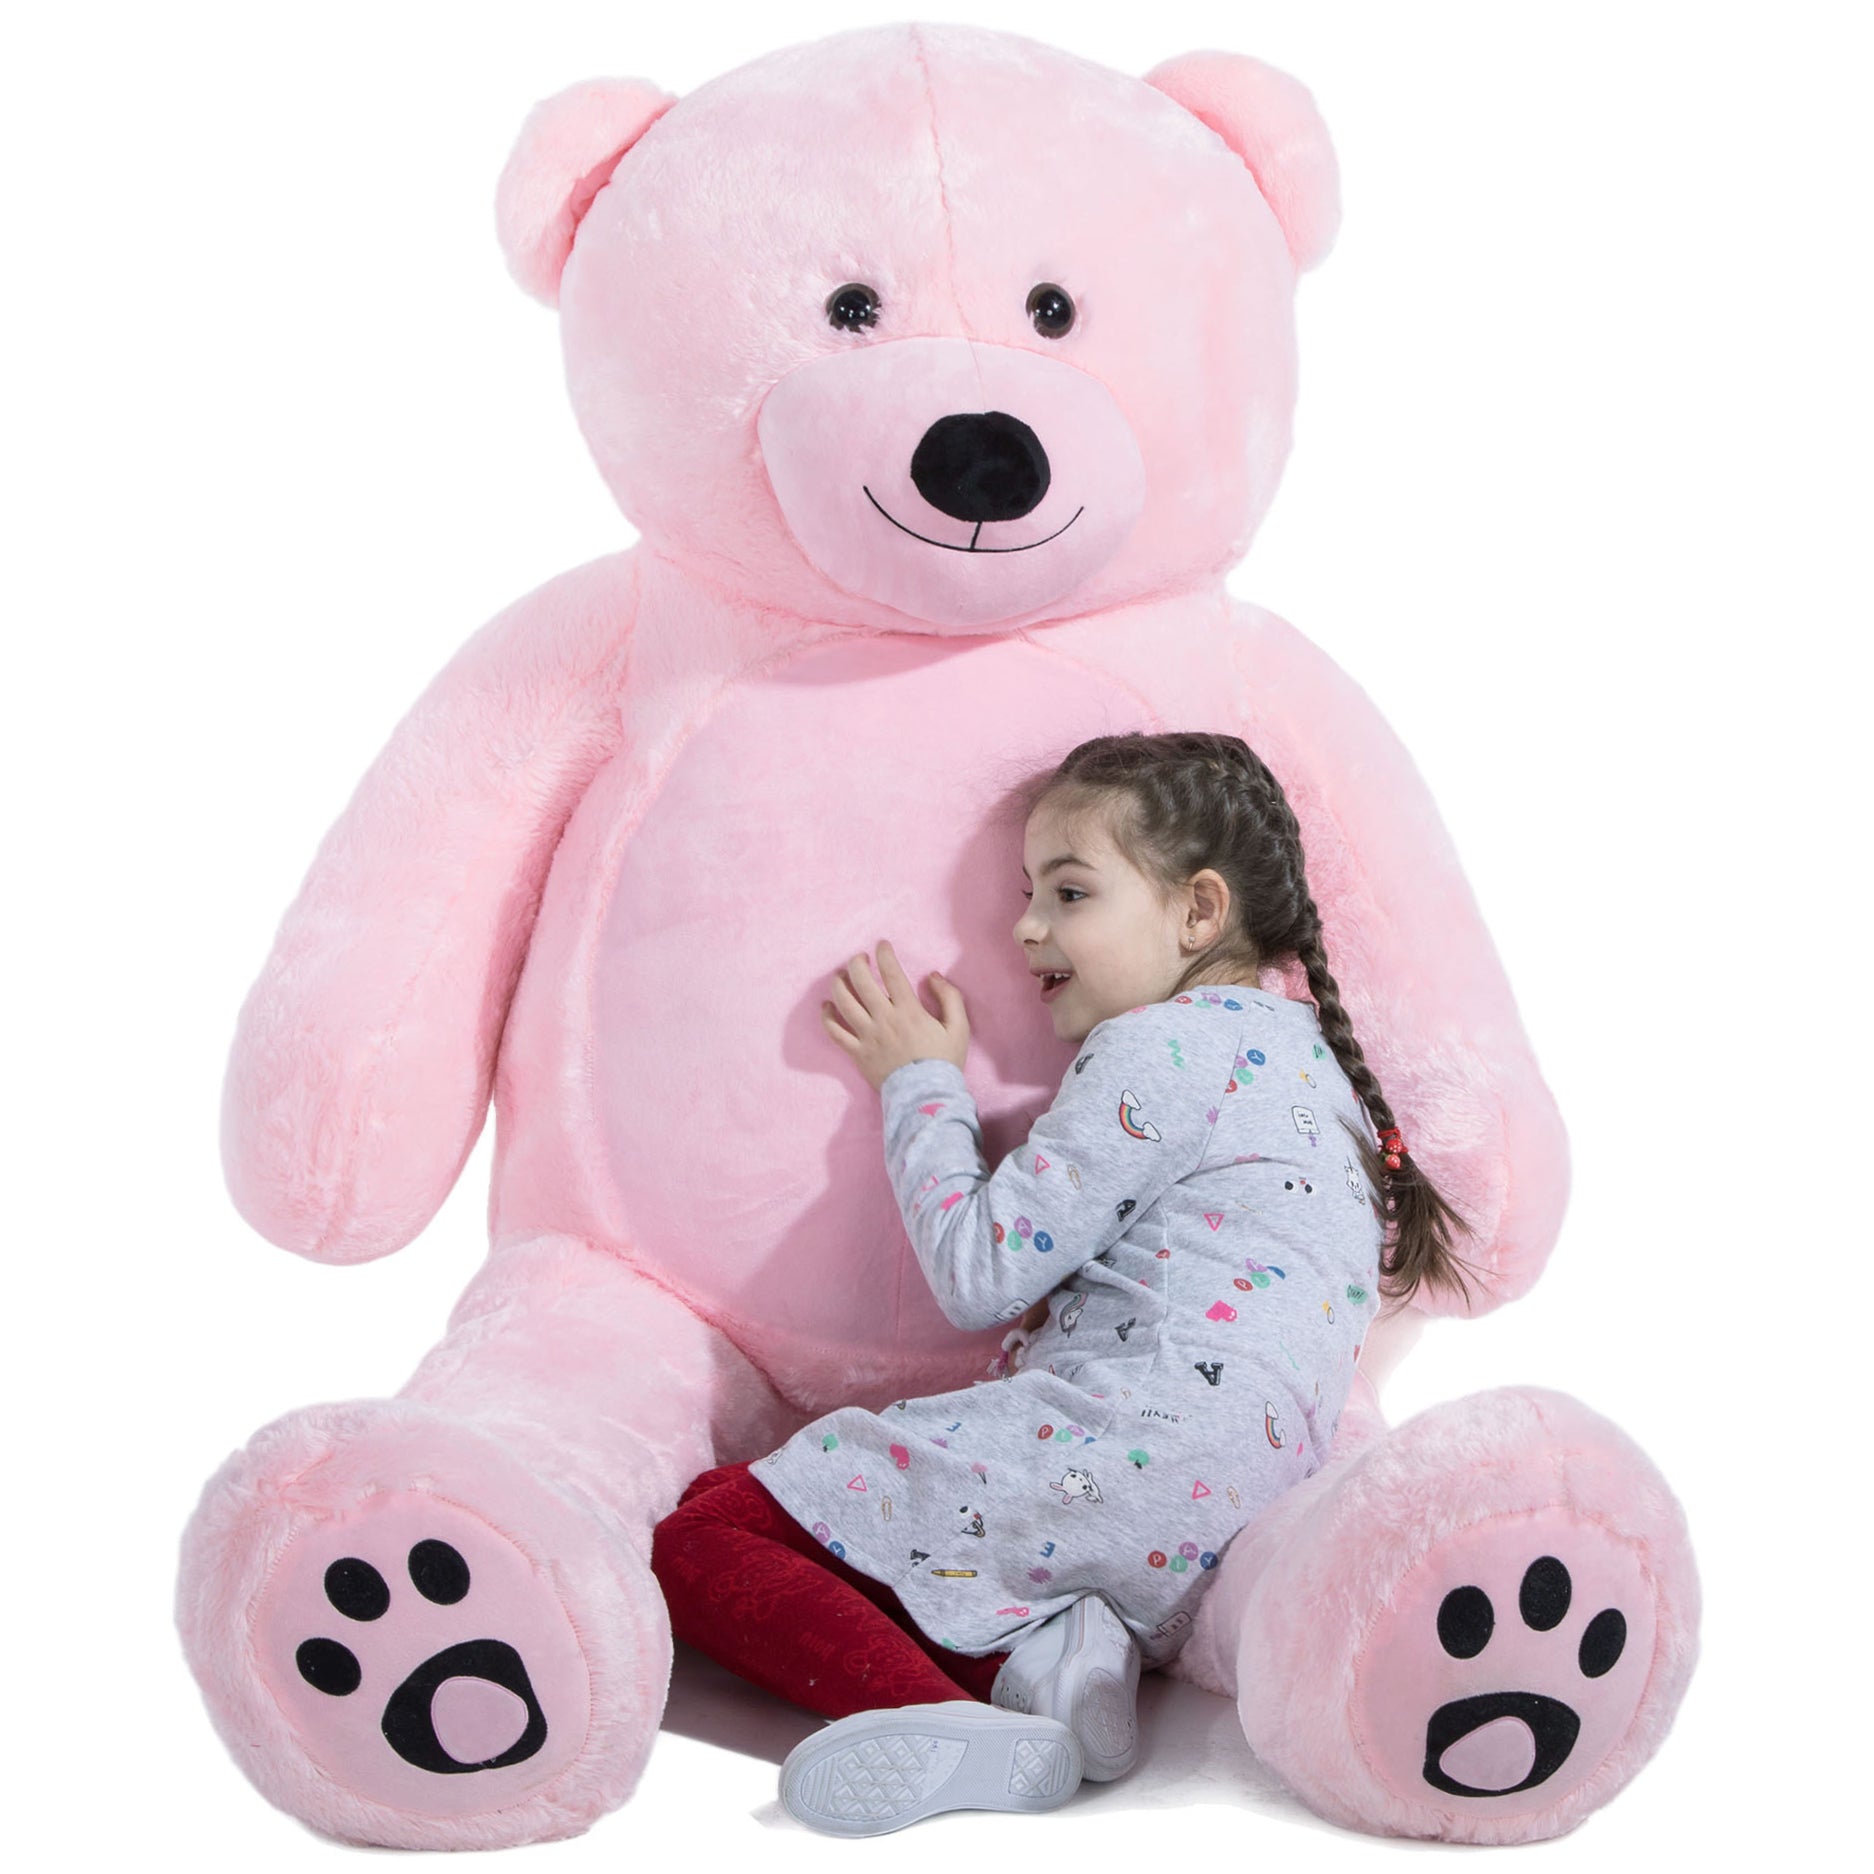 6 Foot Giant Huge Life Size Teddy Bear Daneey 72 Inches